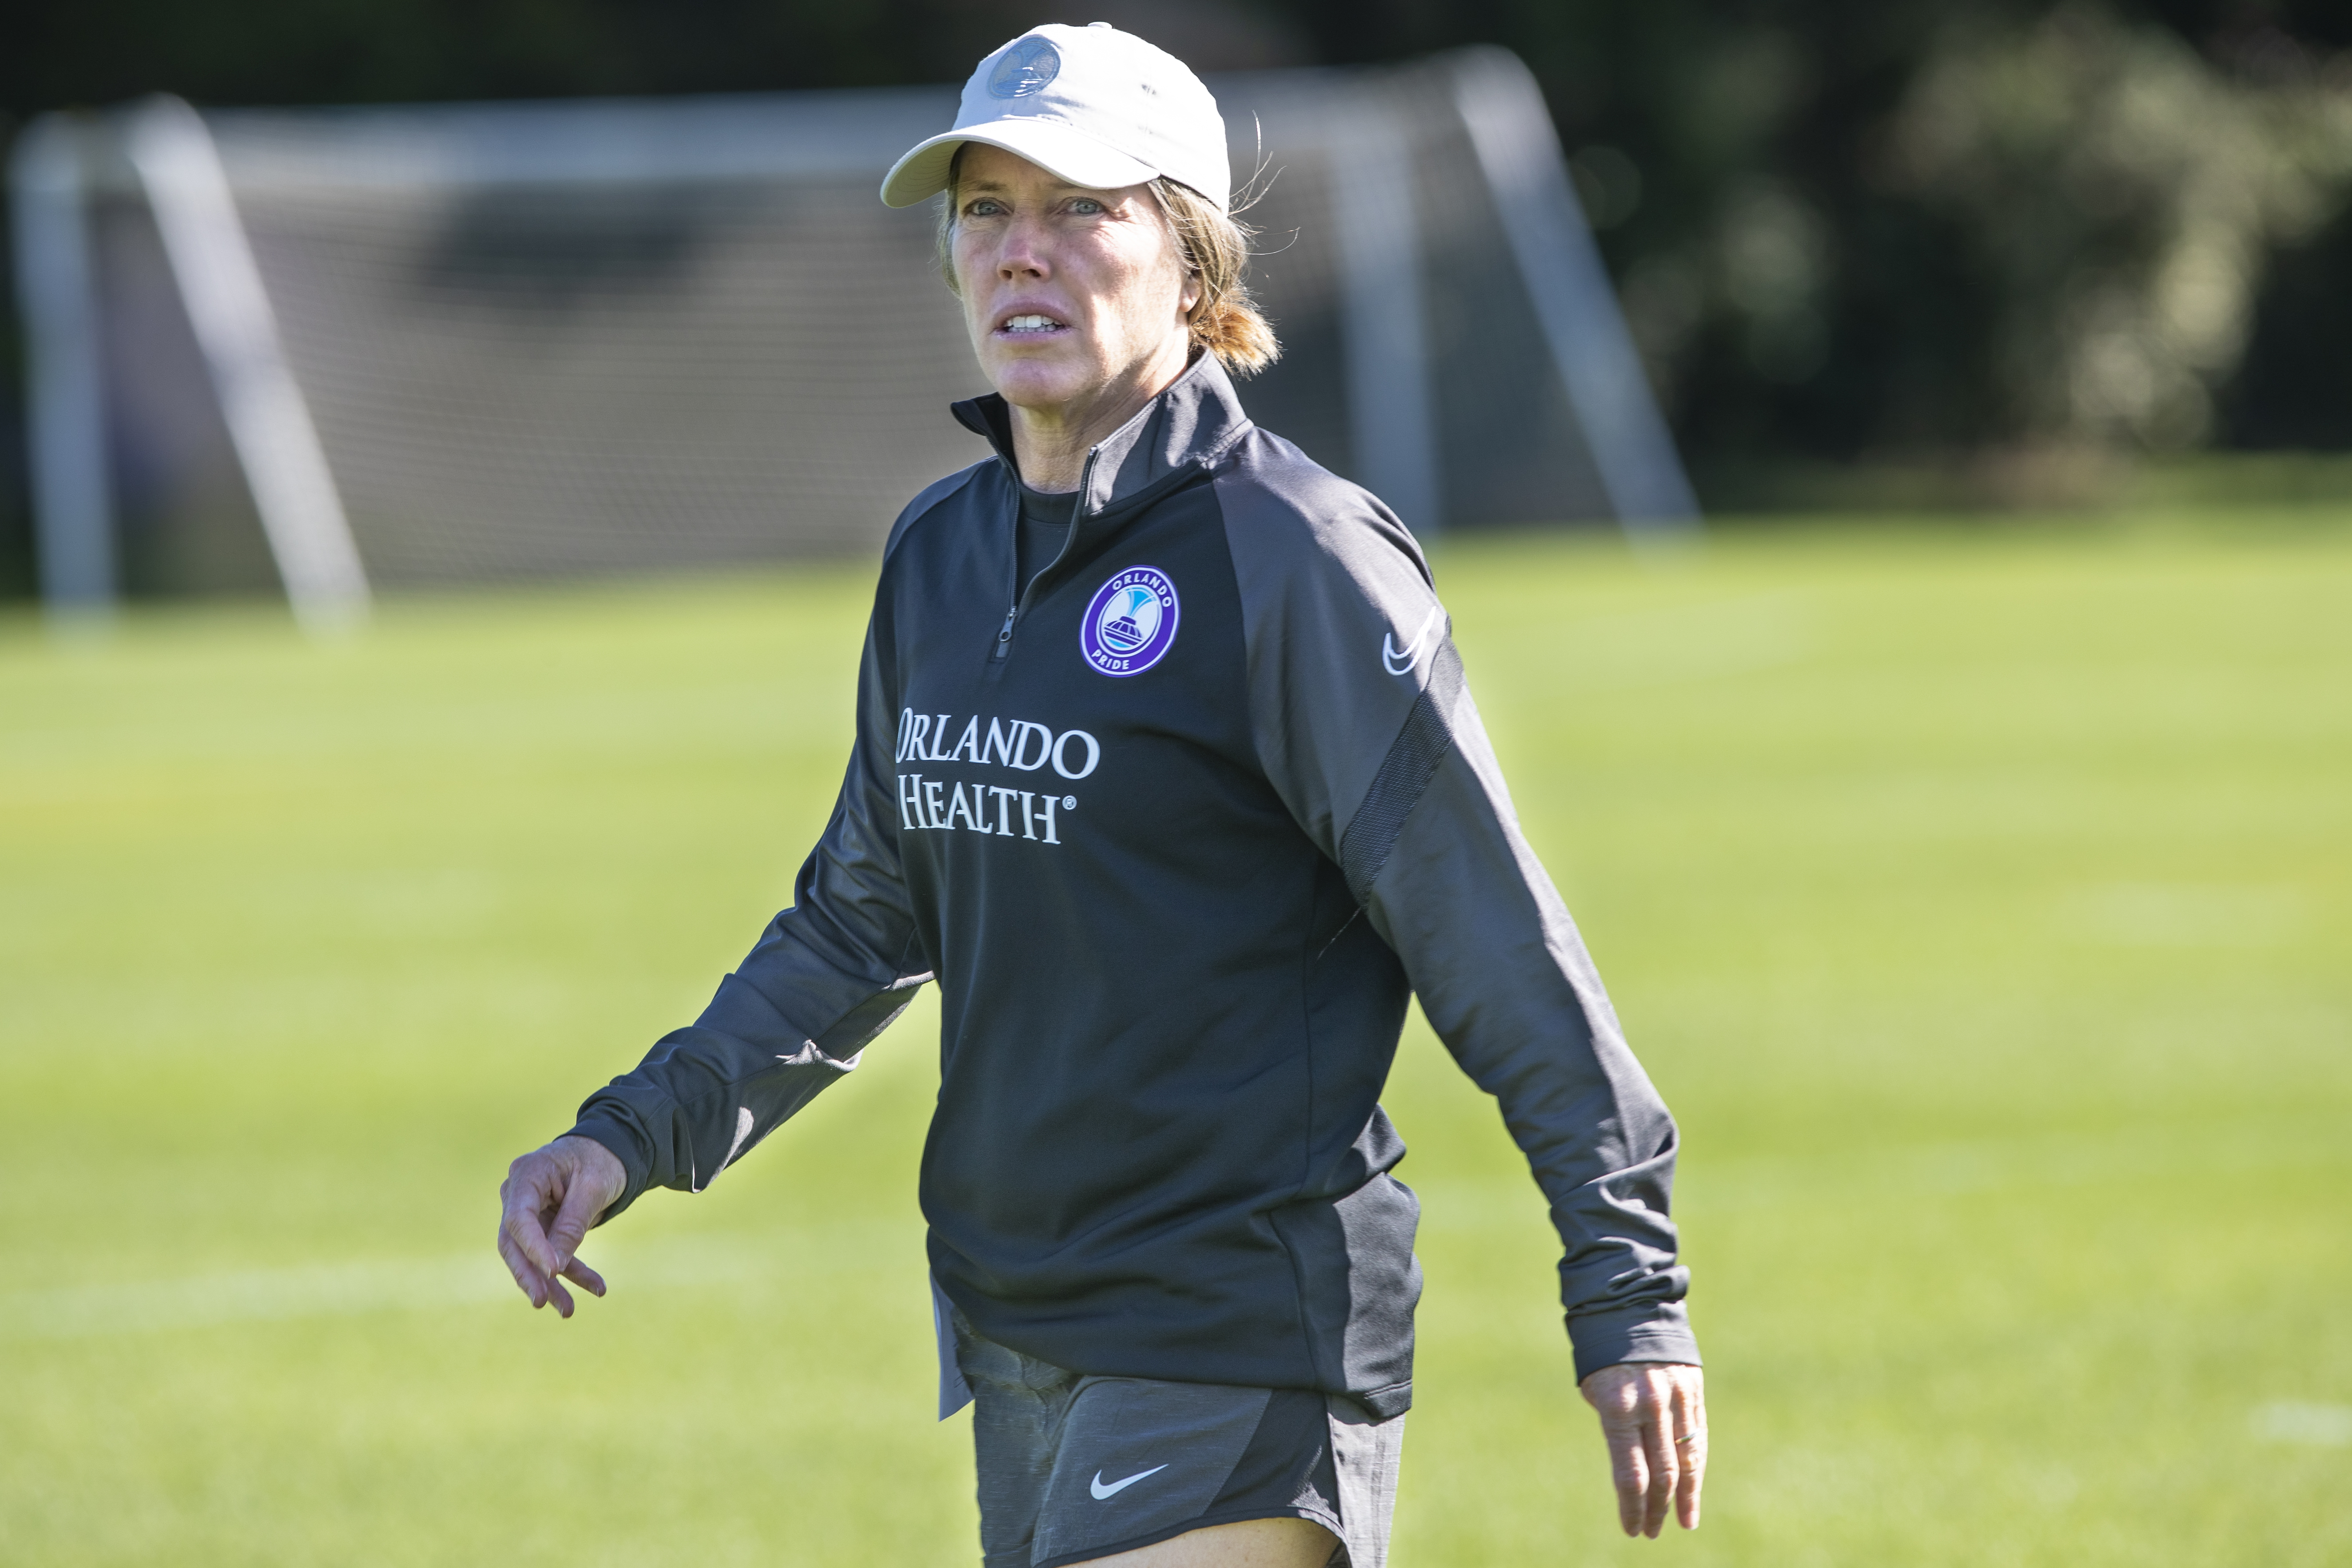 Suspended Pride coach Amanda Cromwell fired by NWSL – Orlando Sentinel